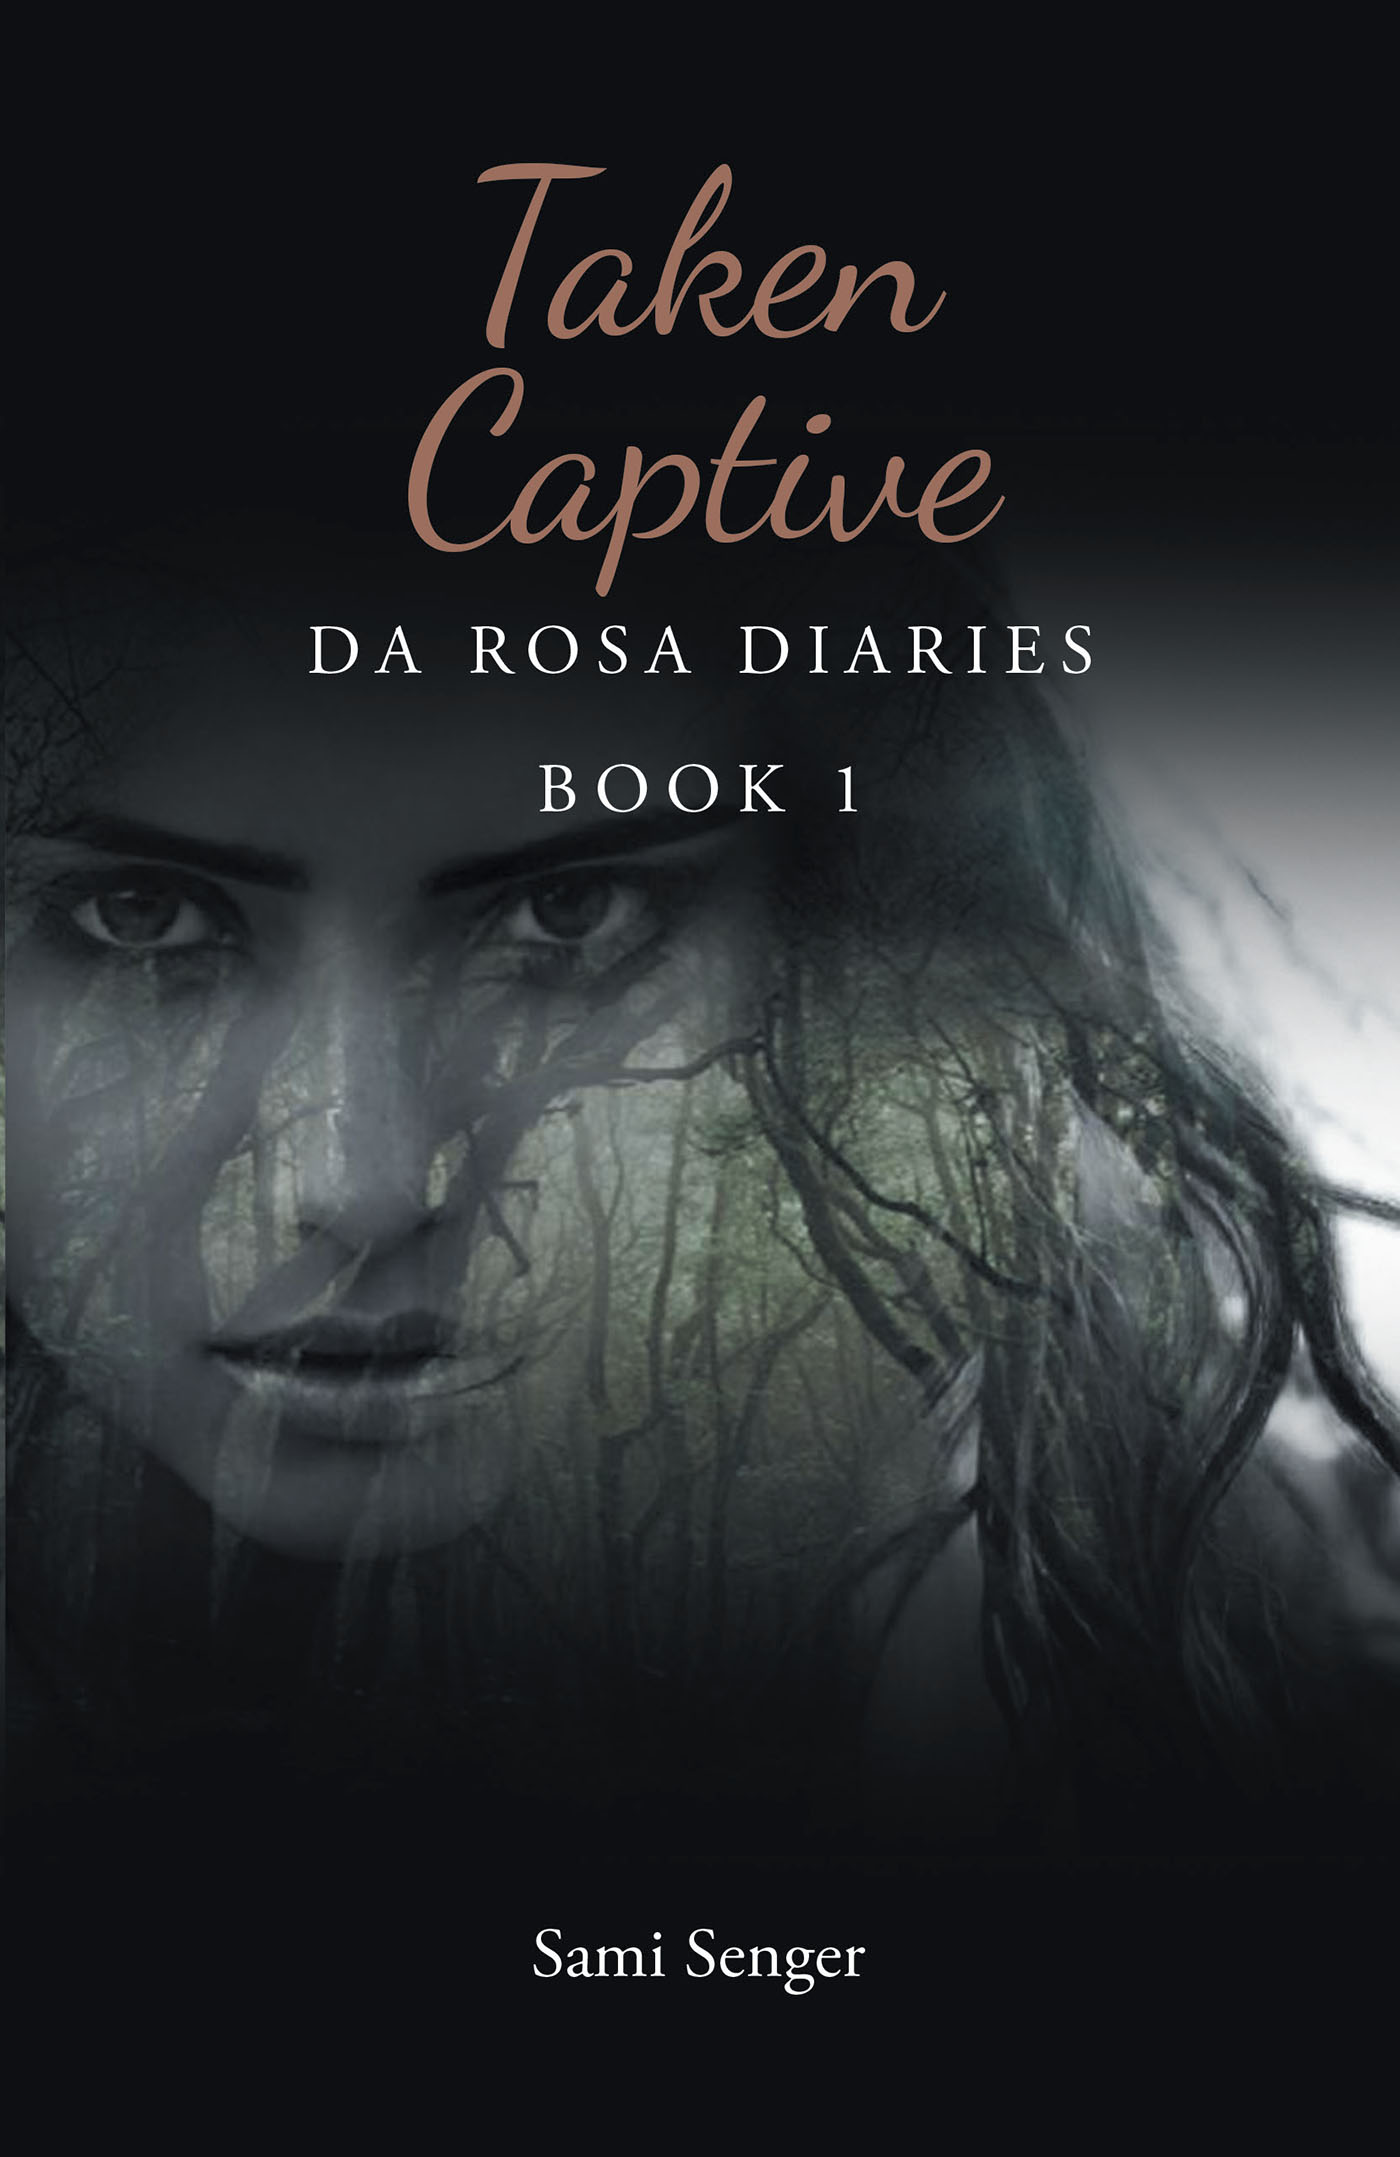 Sami Senger’s New Book, "Taken Captive: Da Rosa Diaries," is a Powerful Novel That Tells the Extreme Story of a Young Girl Who Gets Kidnapped While on Summer Vacation